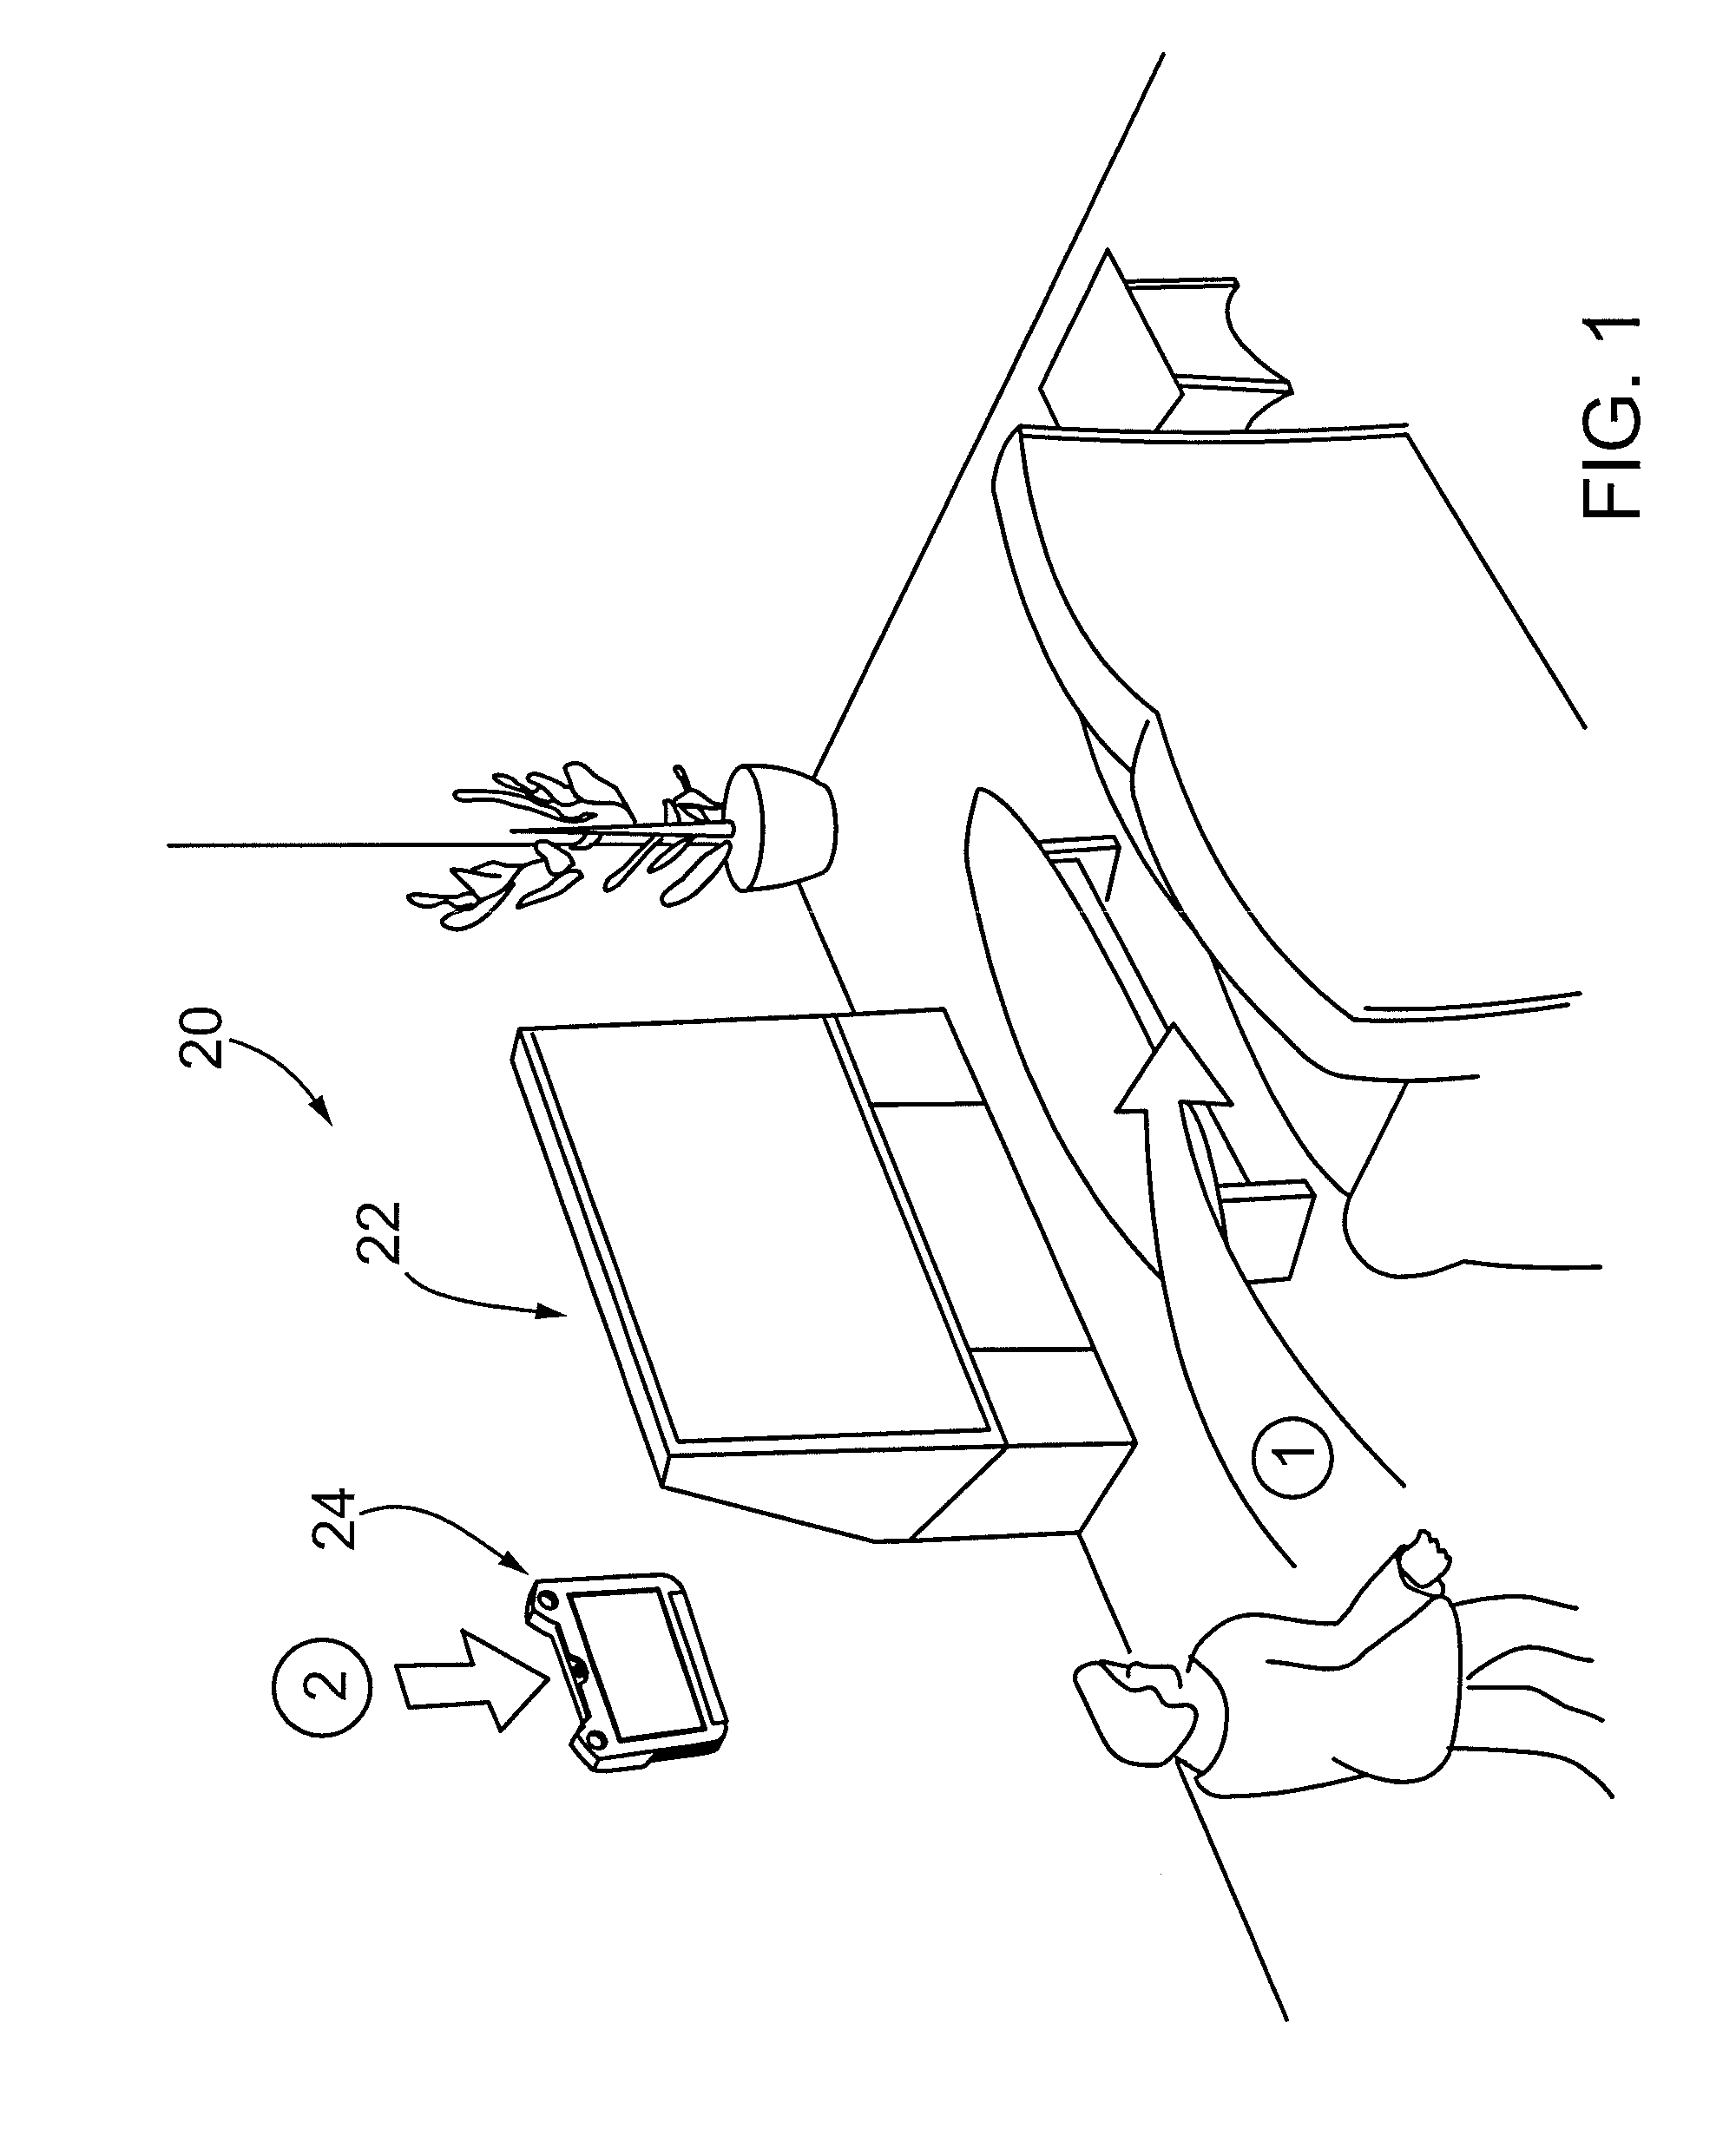 Interactive input system, controller therefor and method of controlling an appliance